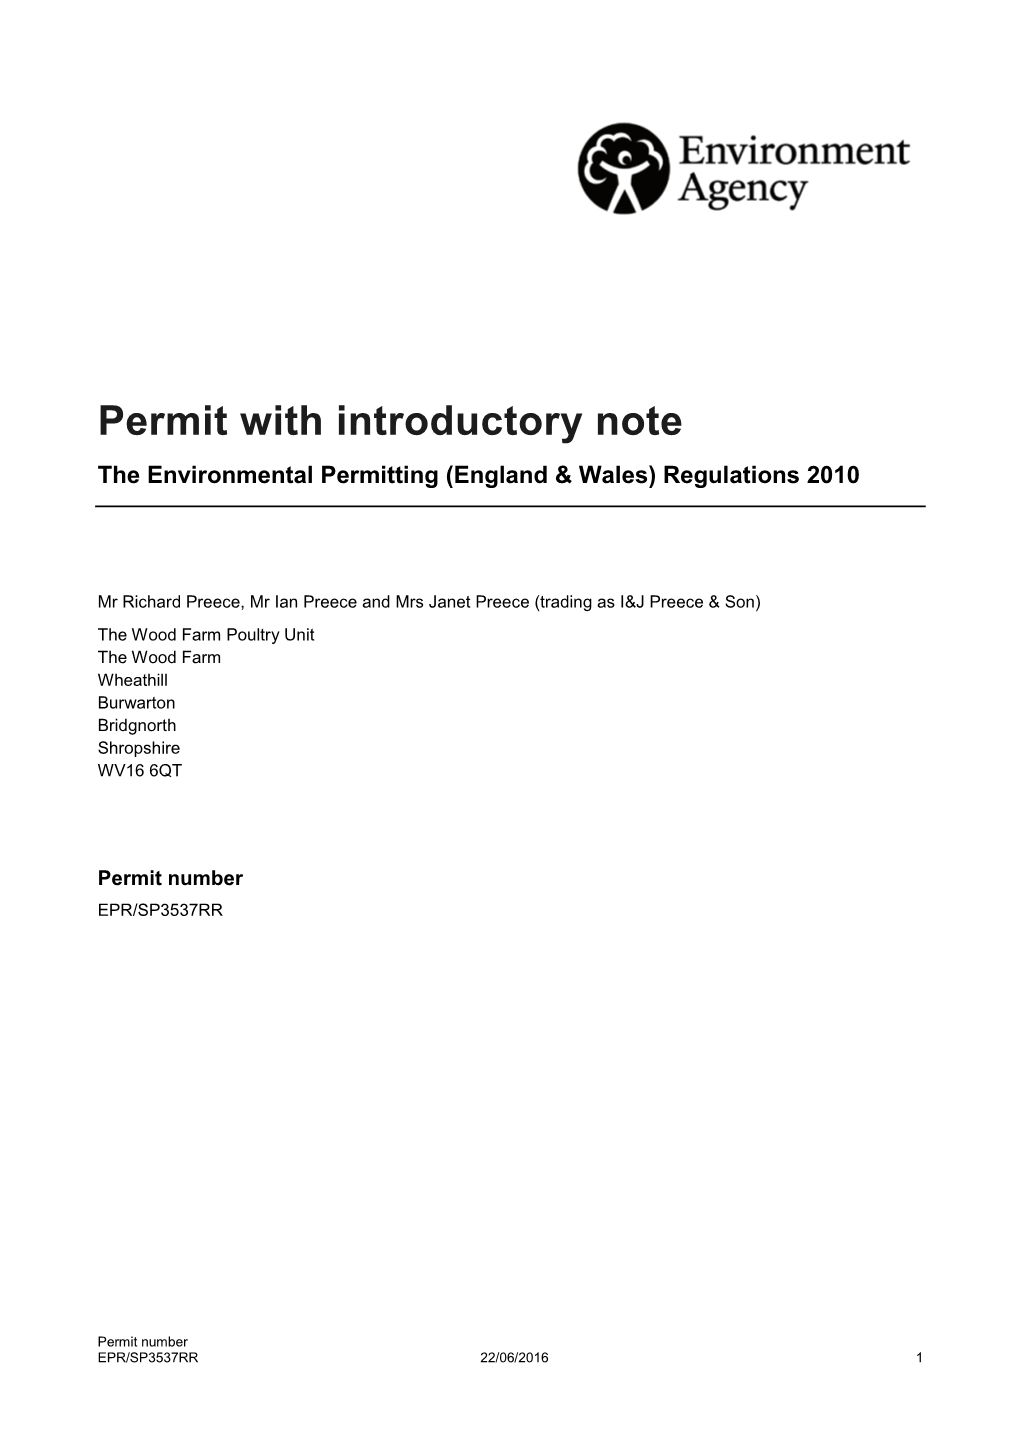 Permit with Introductory Note the Environmental Permitting (England & Wales) Regulations 2010